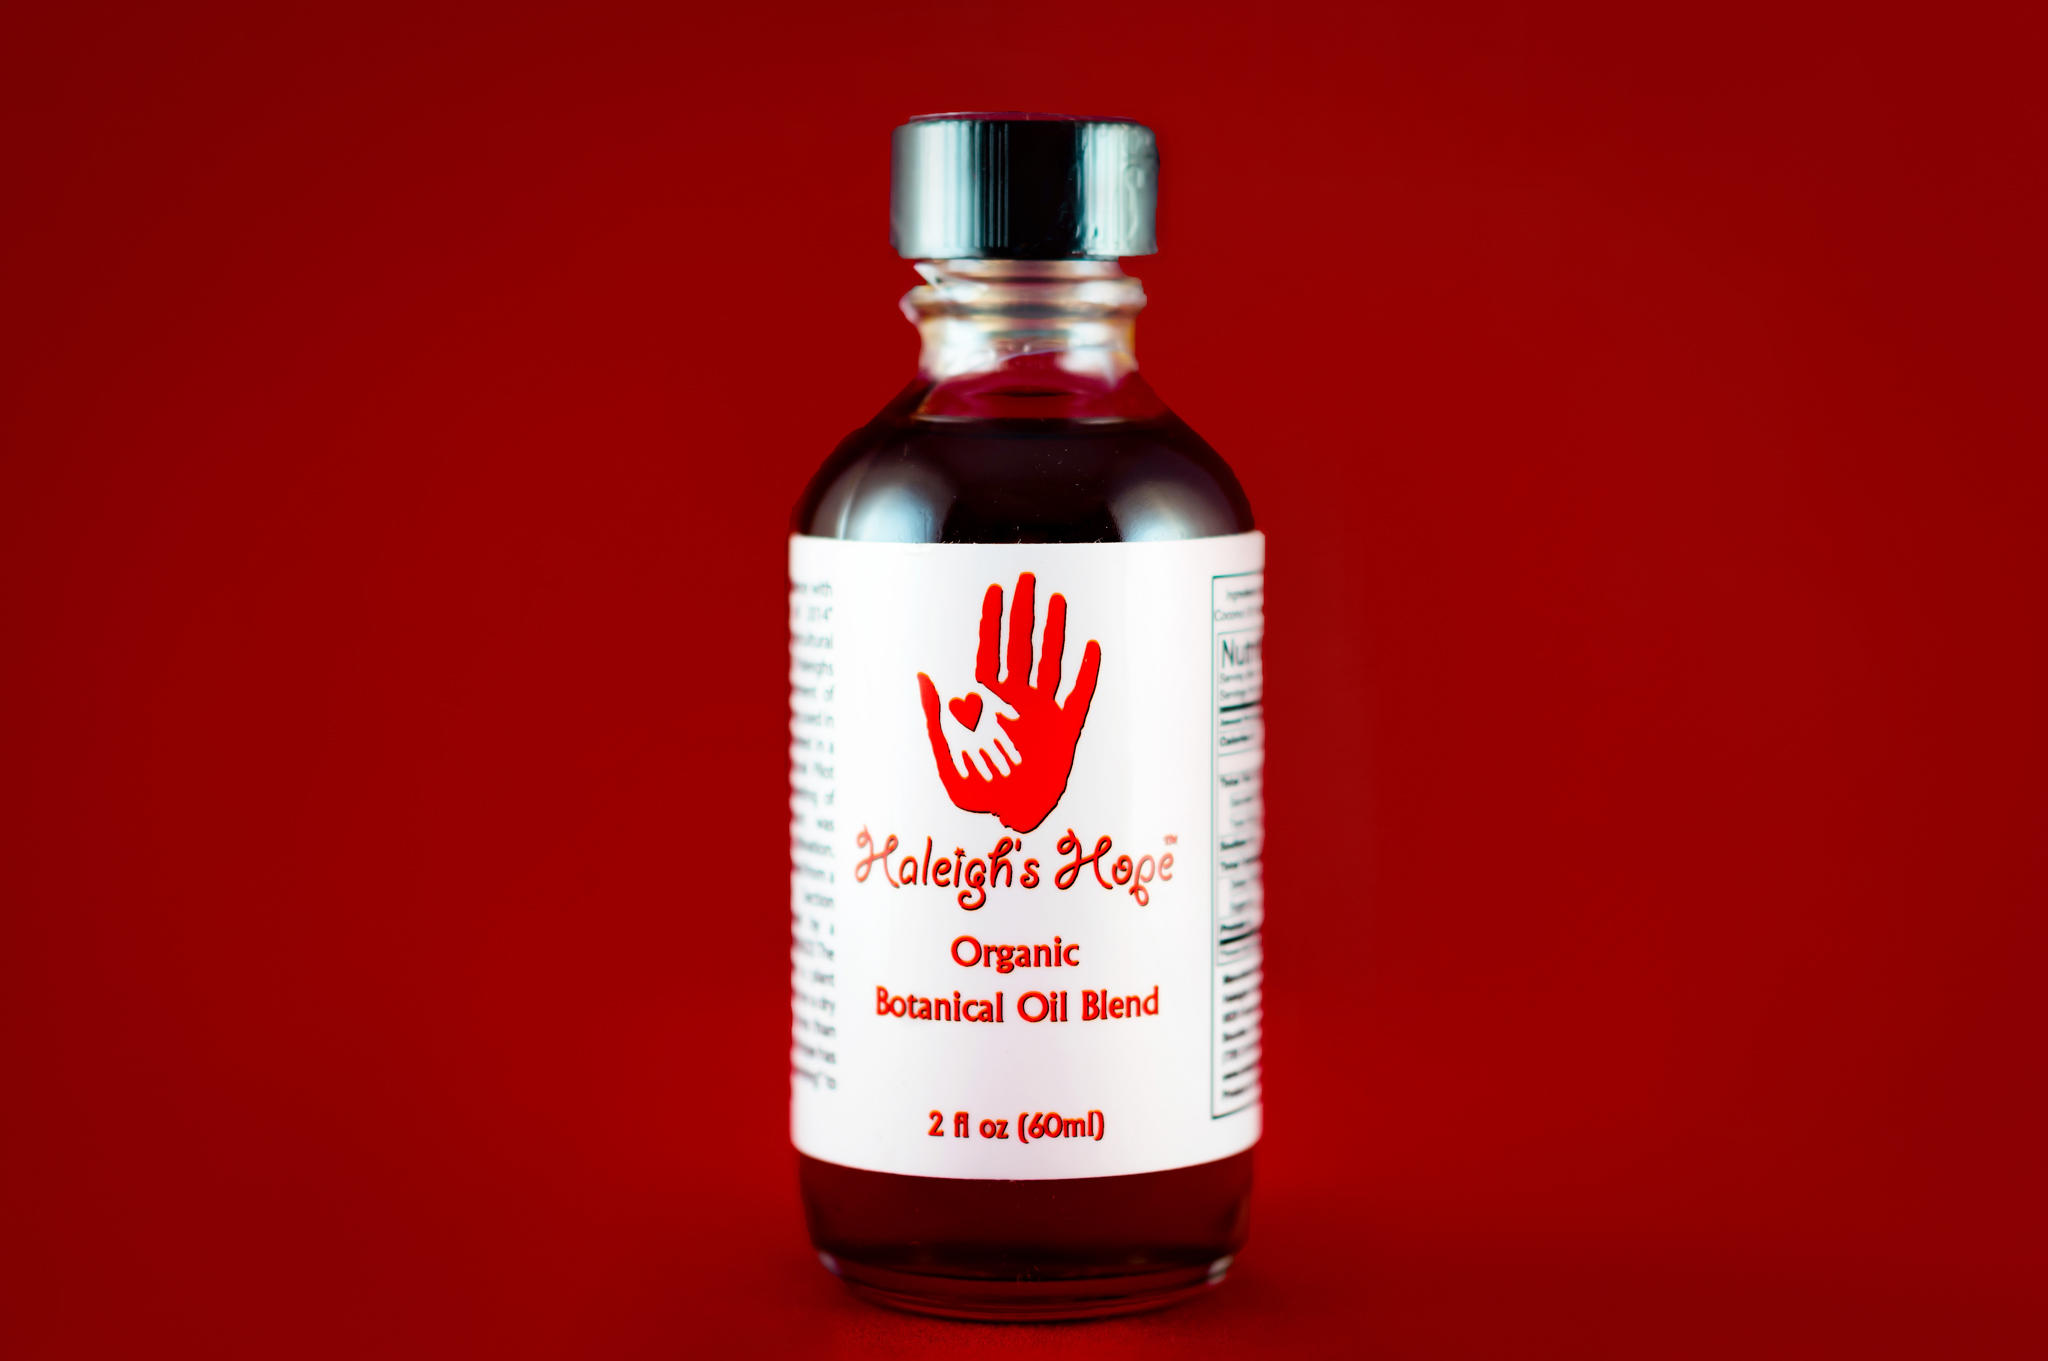 Haileigh's Hope Tincture: One of the most advanced products on the market. A precise blend of cannabinoids and terpenes is what makes this product so effective.